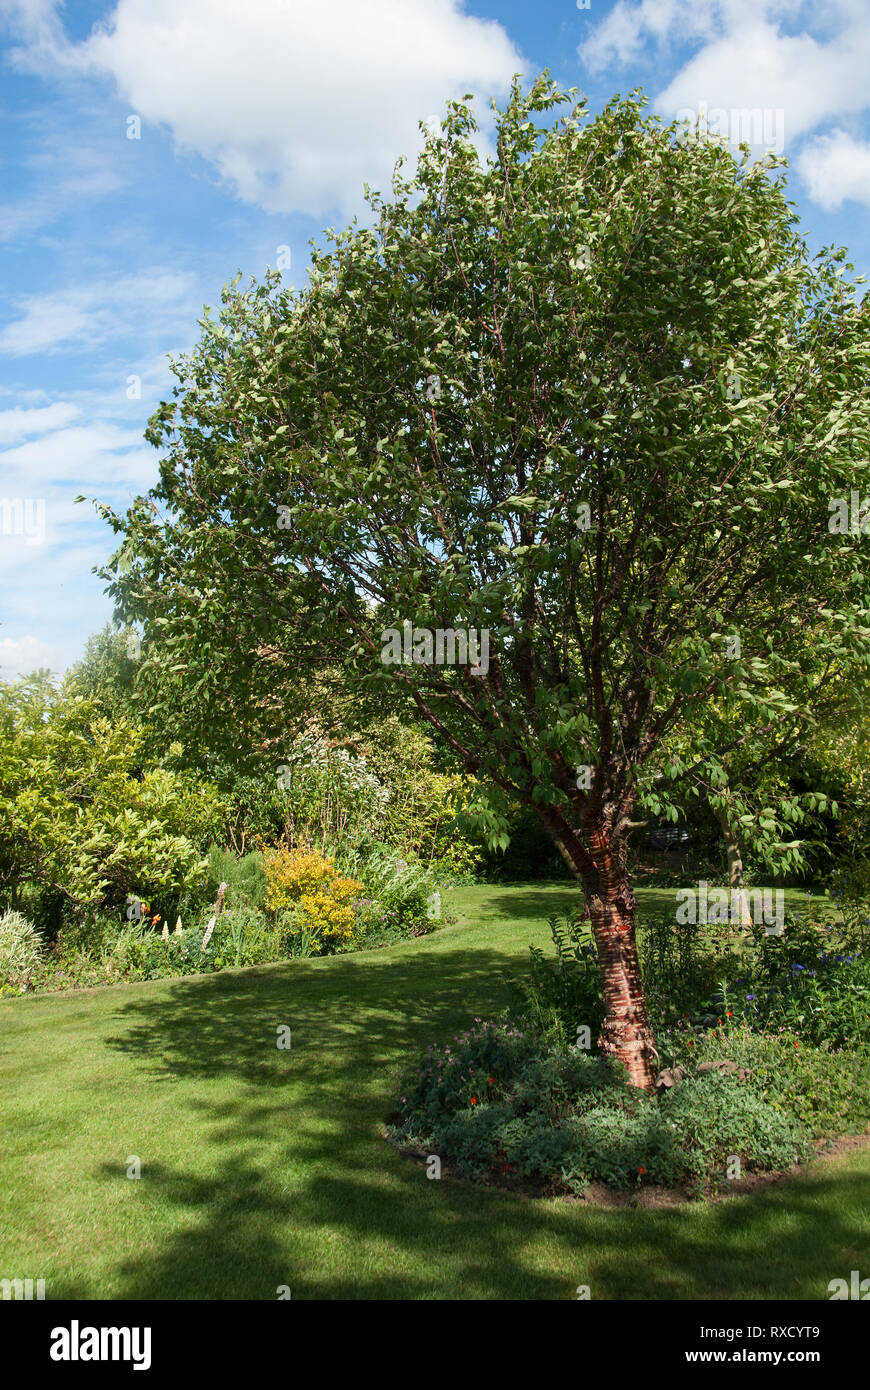 Prunus serrula var. tibetica a feature cherry tree in a private garden in Lincolnshire open for charity Stock Photo